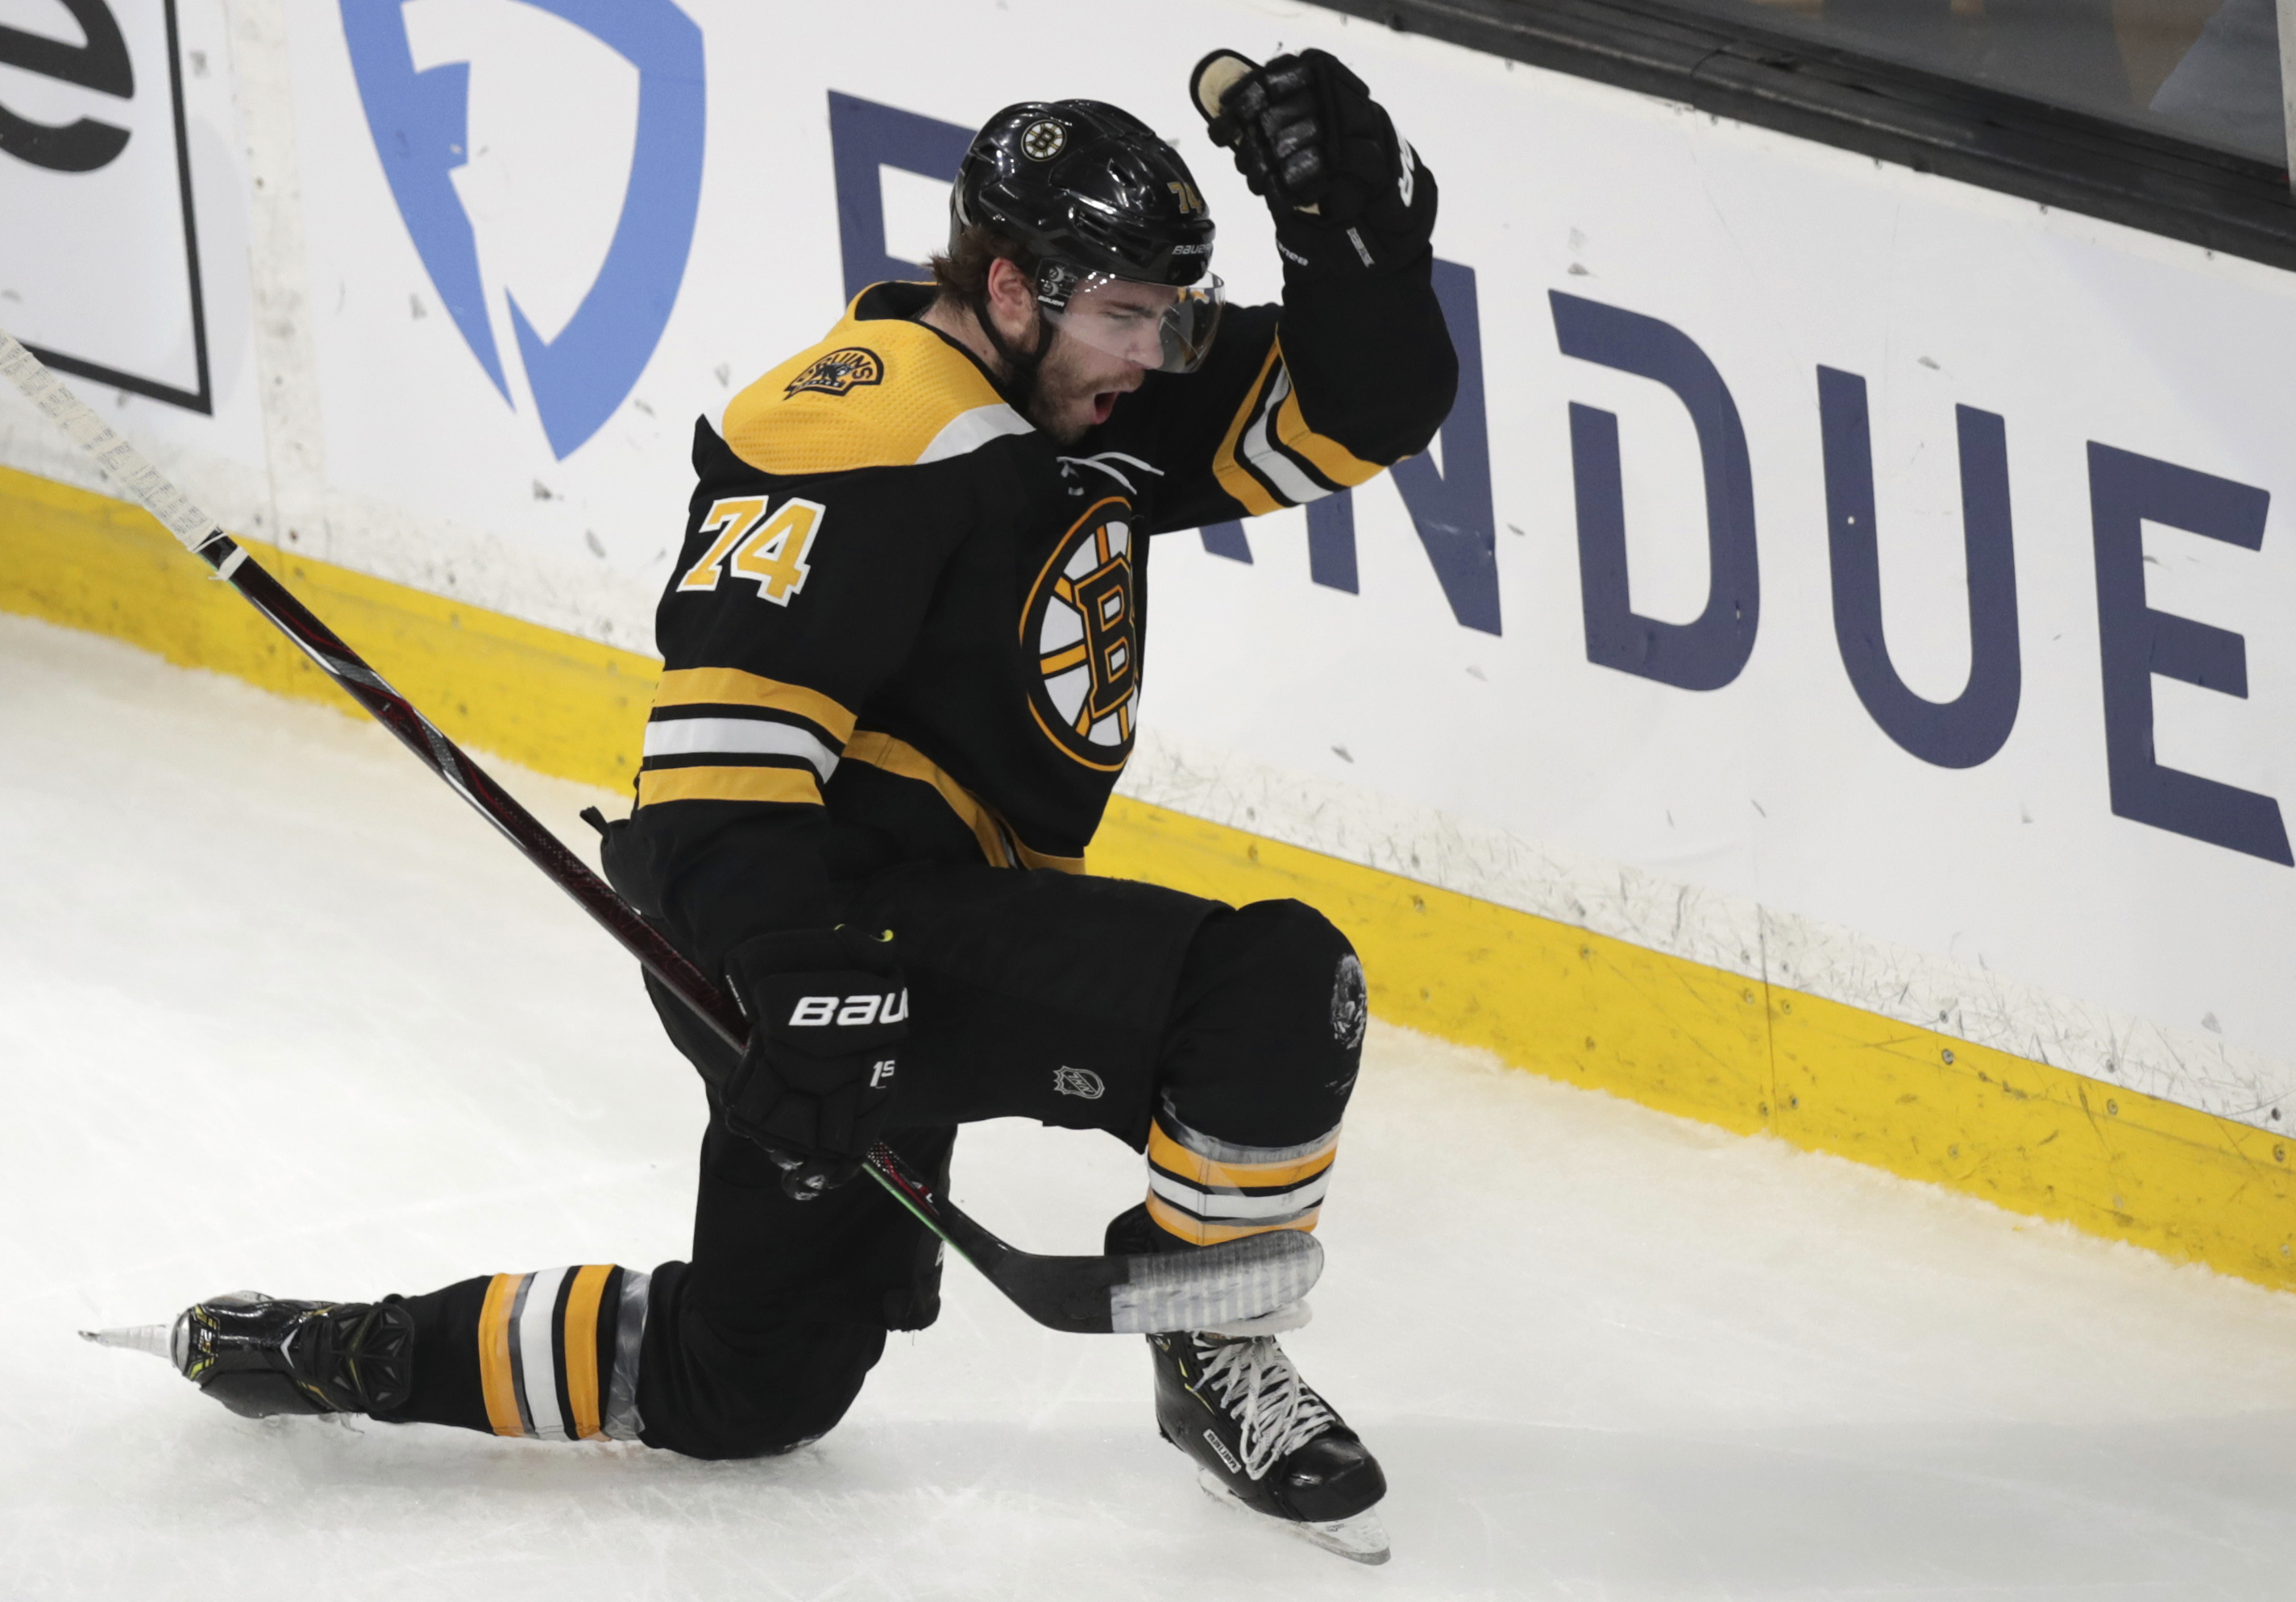 Bruins thump Hurricanes 6-2, take 2-0 lead in East finals